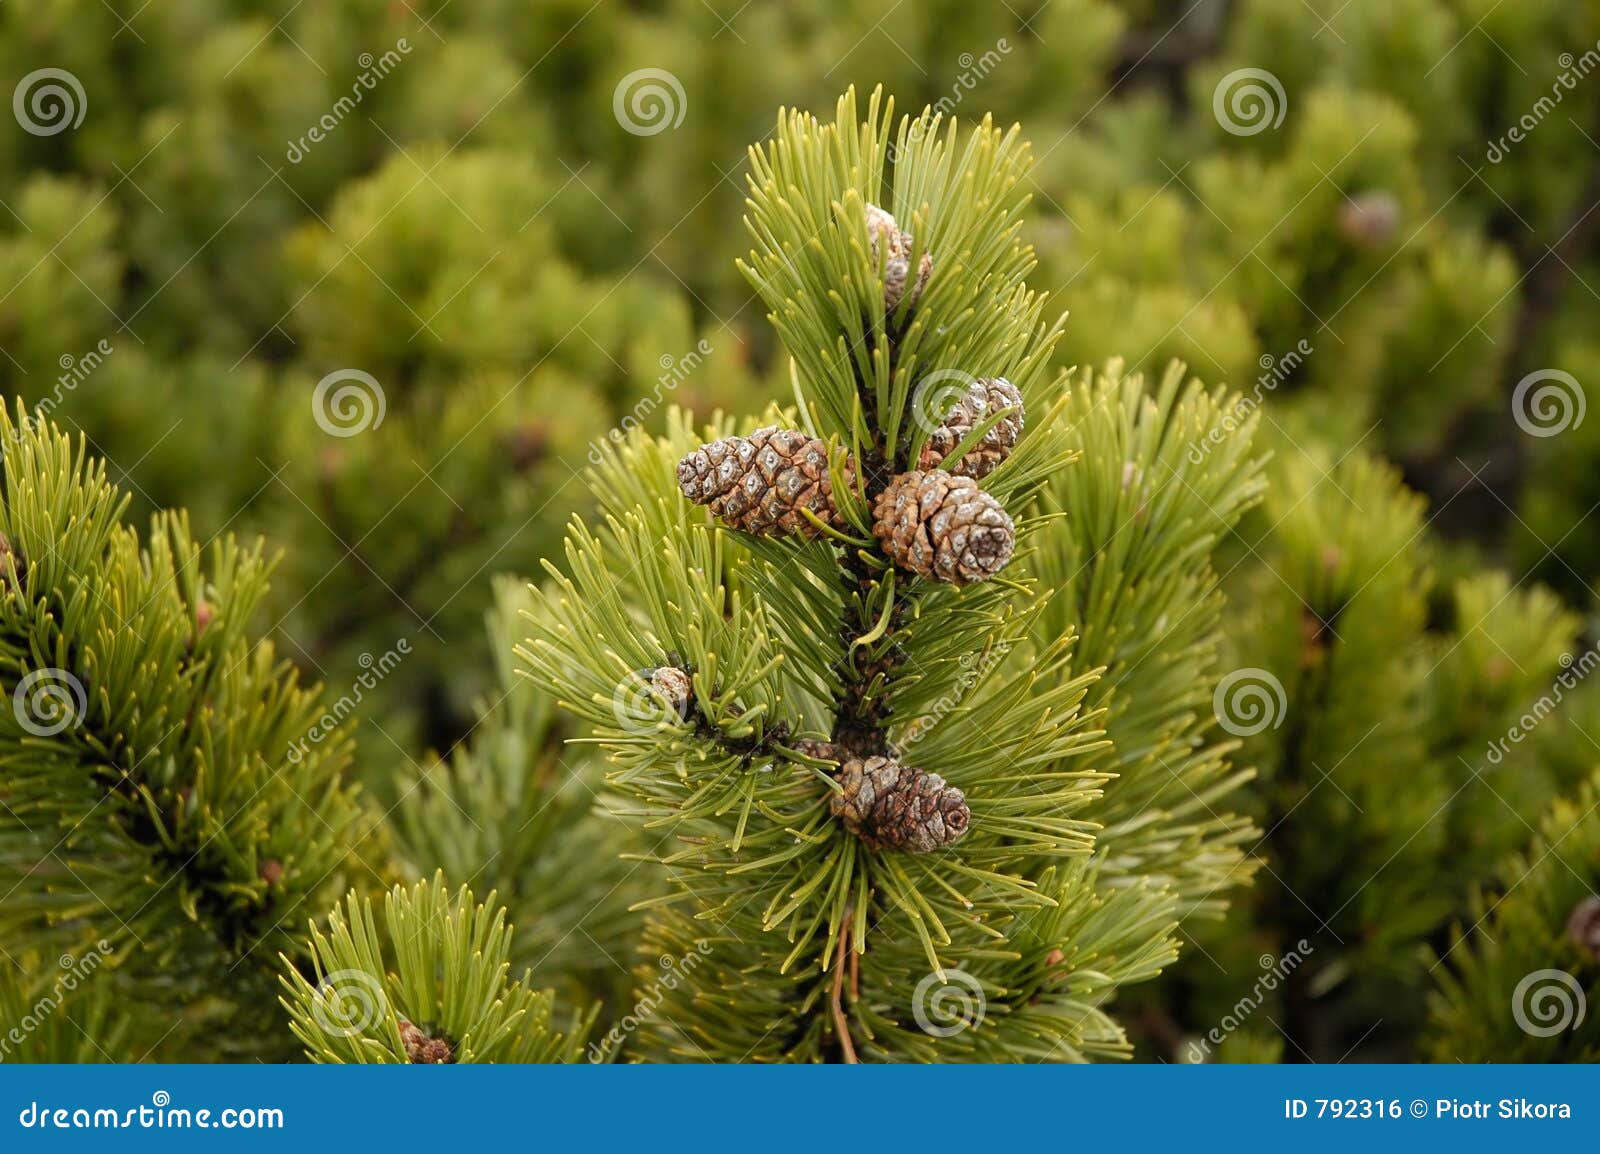 conifer branch witch cones